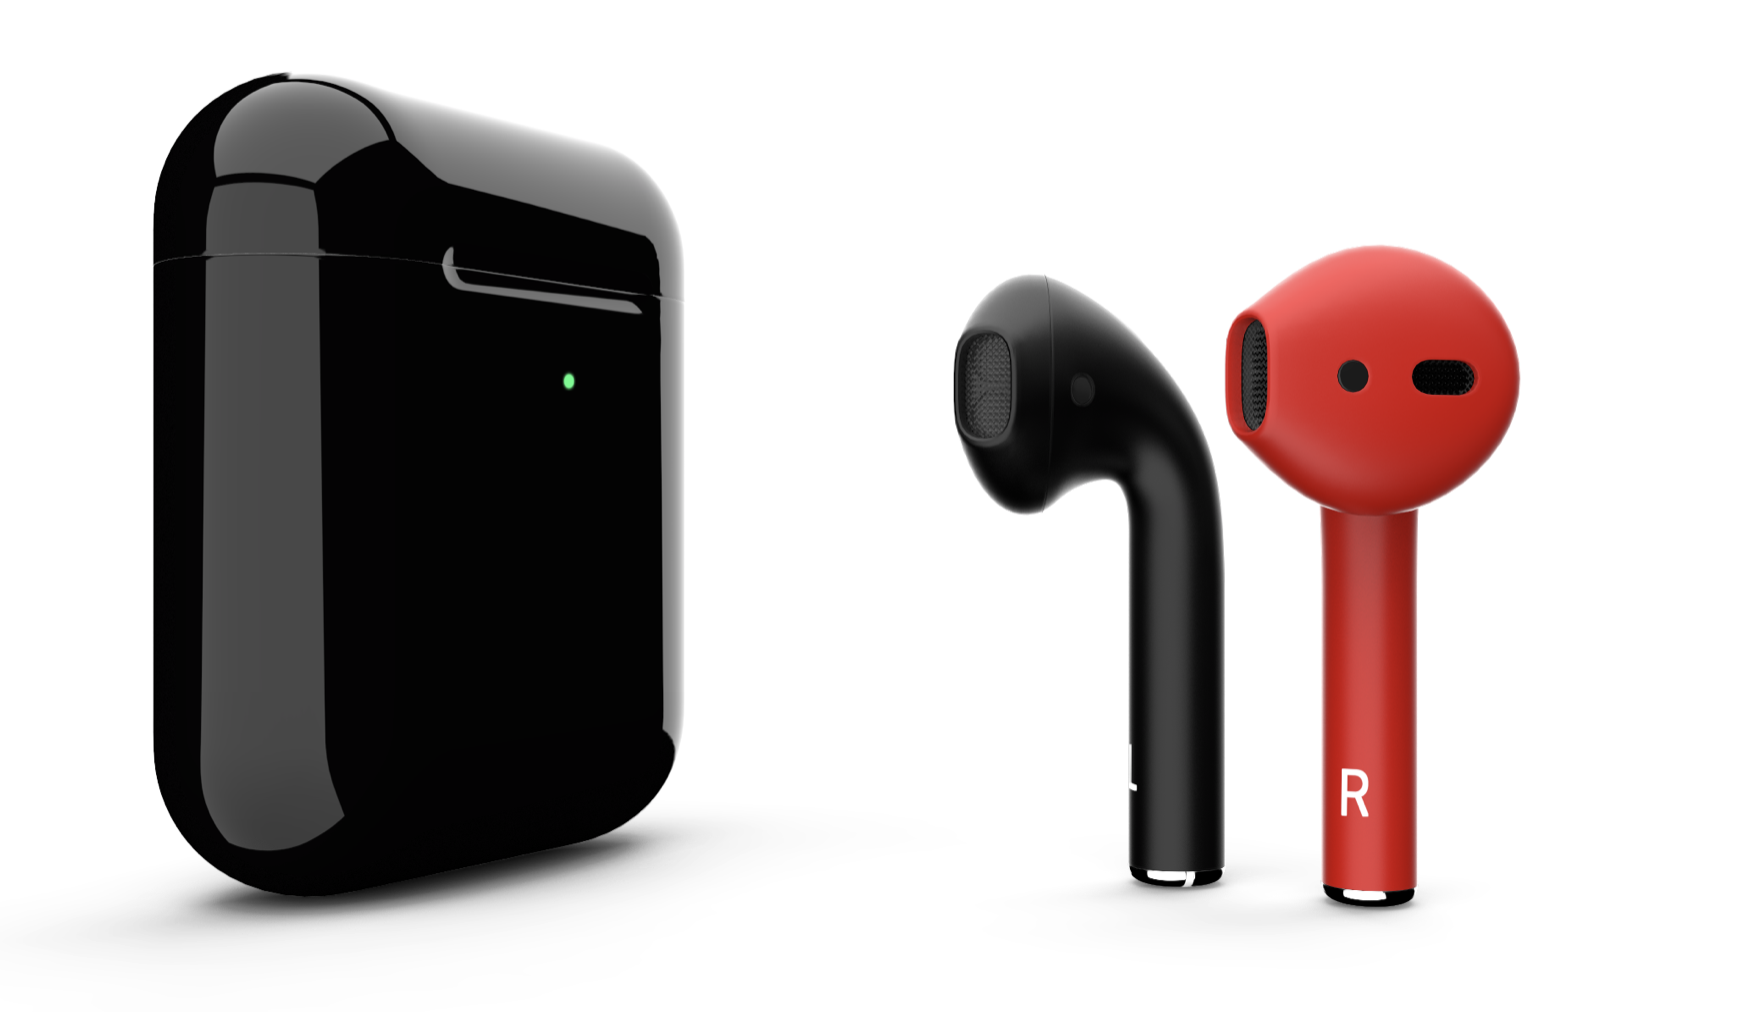 Kuo: Two New AirPods Models Launching in 2019 & 2020, One with an All-New Design